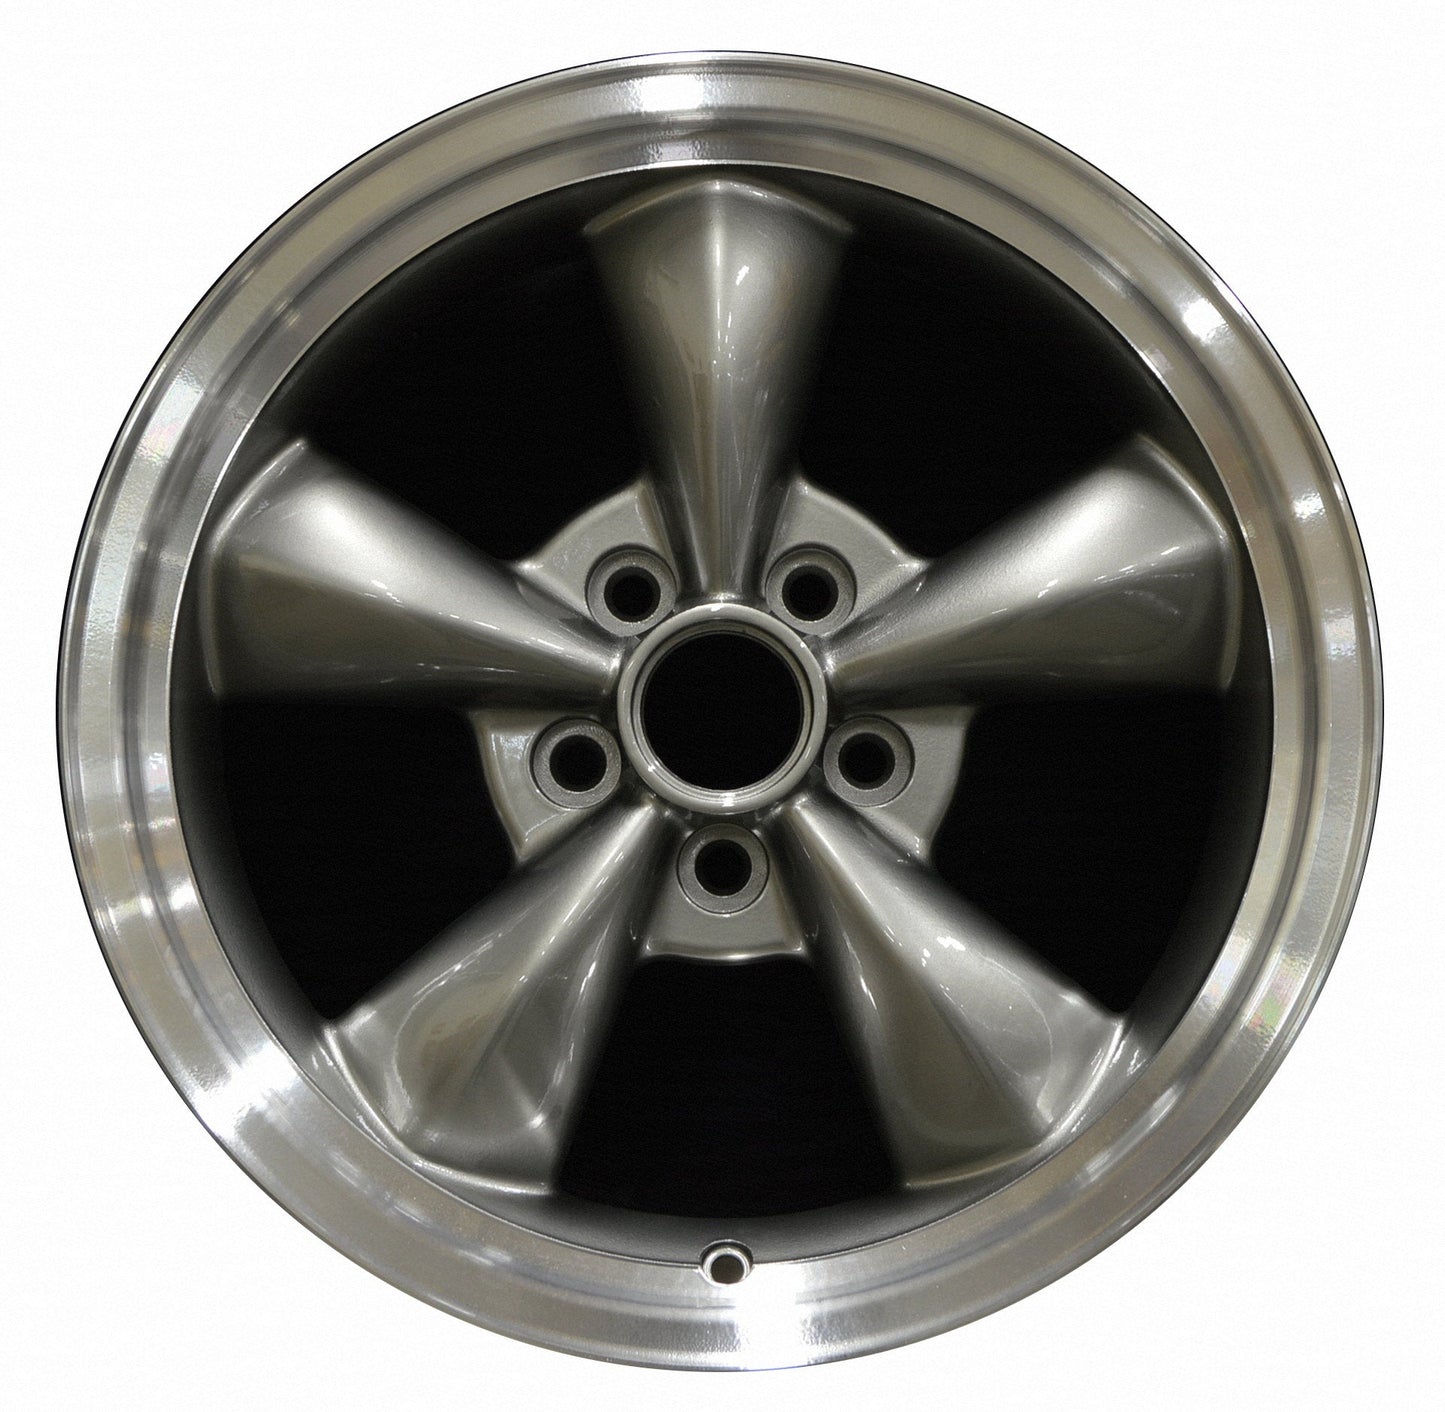 Ford Mustang  1994, 1995, 1996, 1997, 1998, 1999, 2000, 2001, 2002, 2003, 2004 Factory OEM Car Wheel Size 17x8 Alloy WAO.3448.LC01.FC